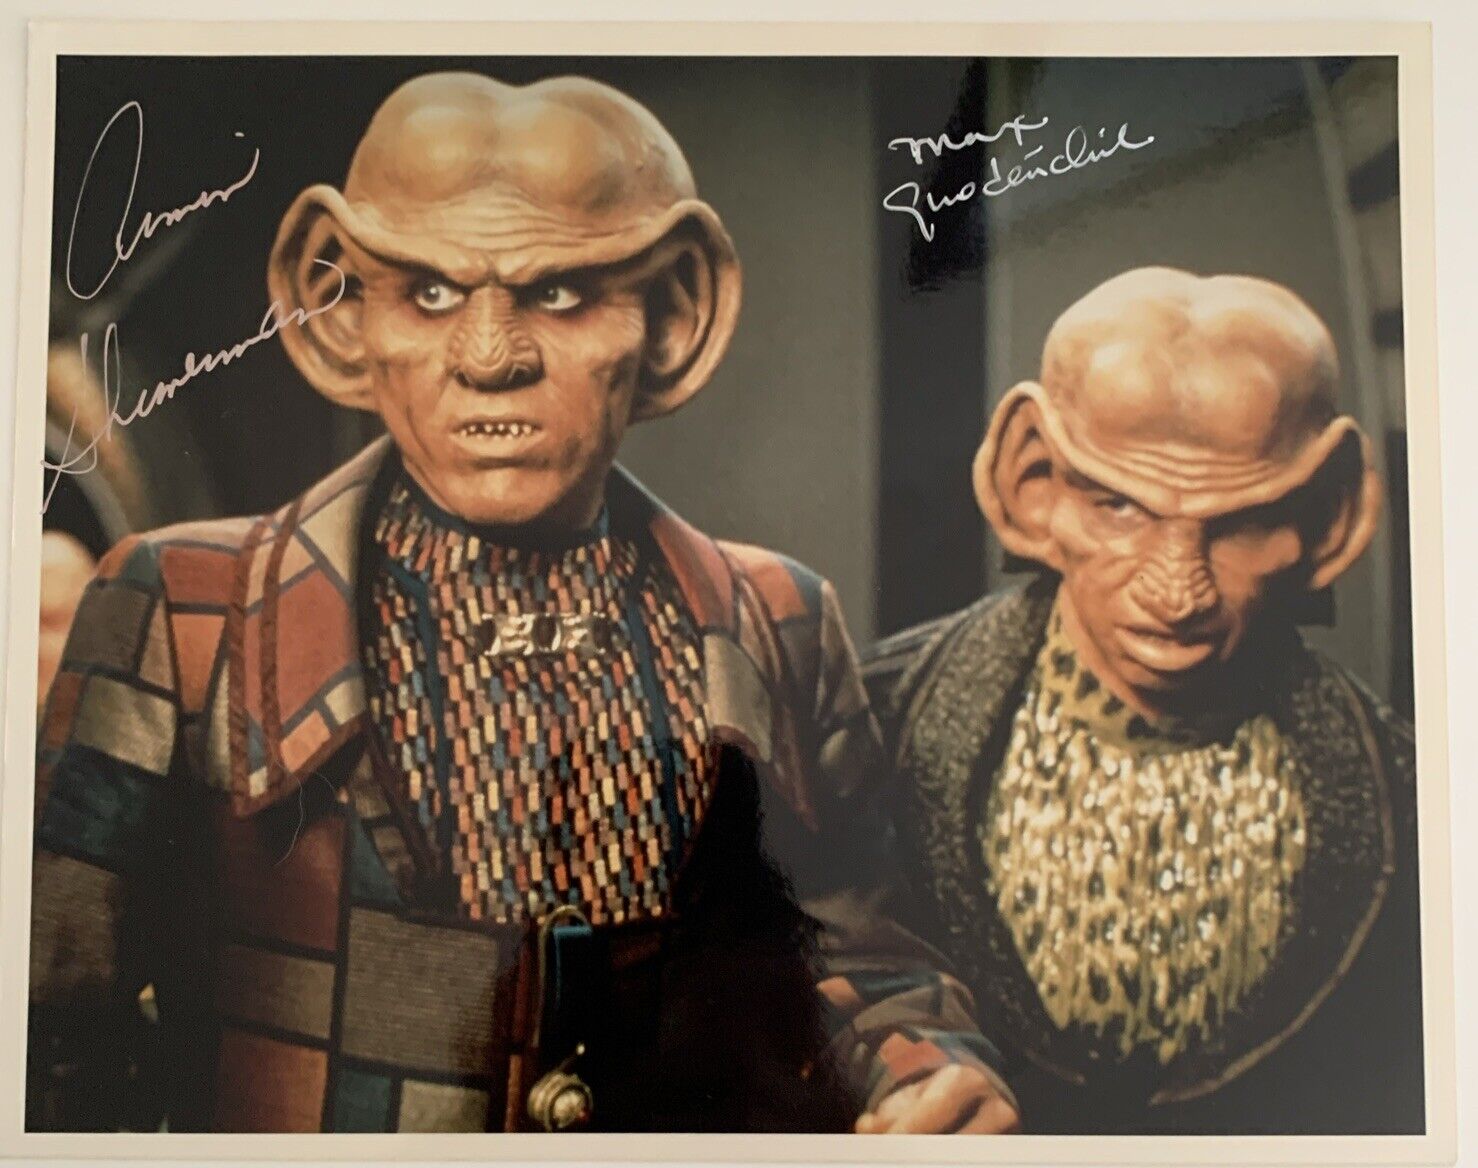 SIGNED ARMIN SHIMERMAN (QUARK) AND MAX GRODENCHIK (ROM) DS9 8x10 COLOR PHOTO